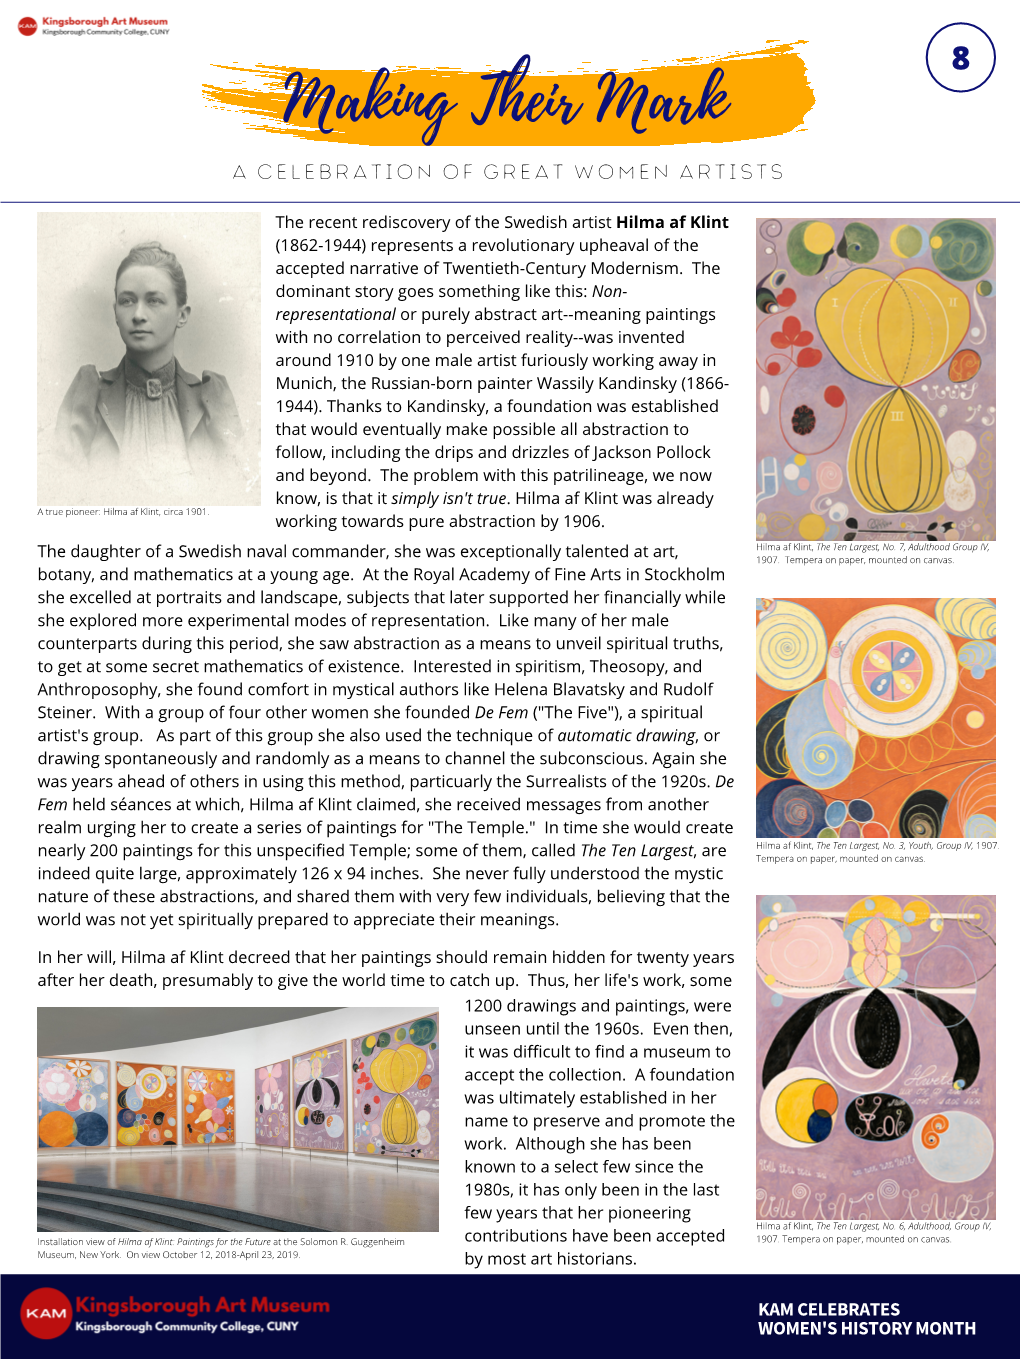 Hilma Af Klint (1862-1944) Represents a Revolutionary Upheaval of the Accepted Narrative of Twentieth-Century Modernism